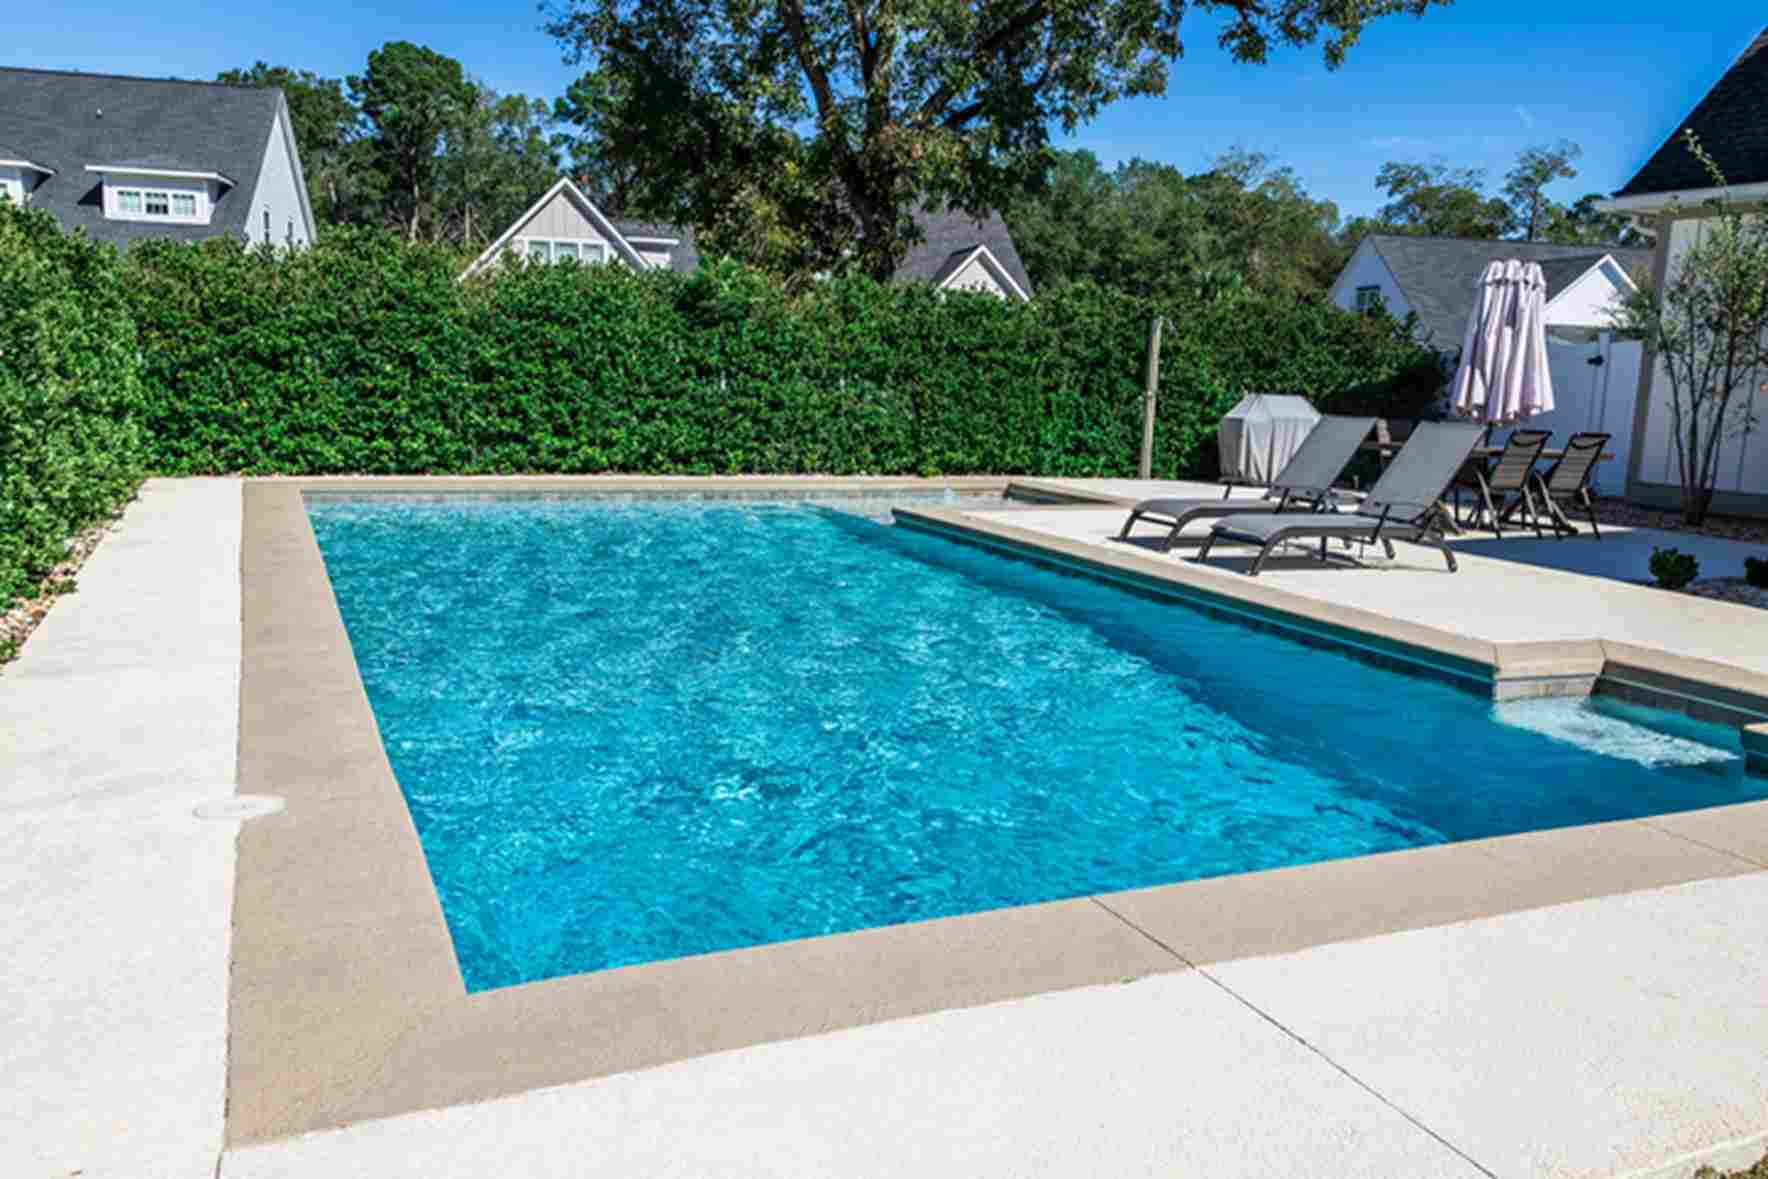 Tips for Winterizing Your Swimming Pool in Texas